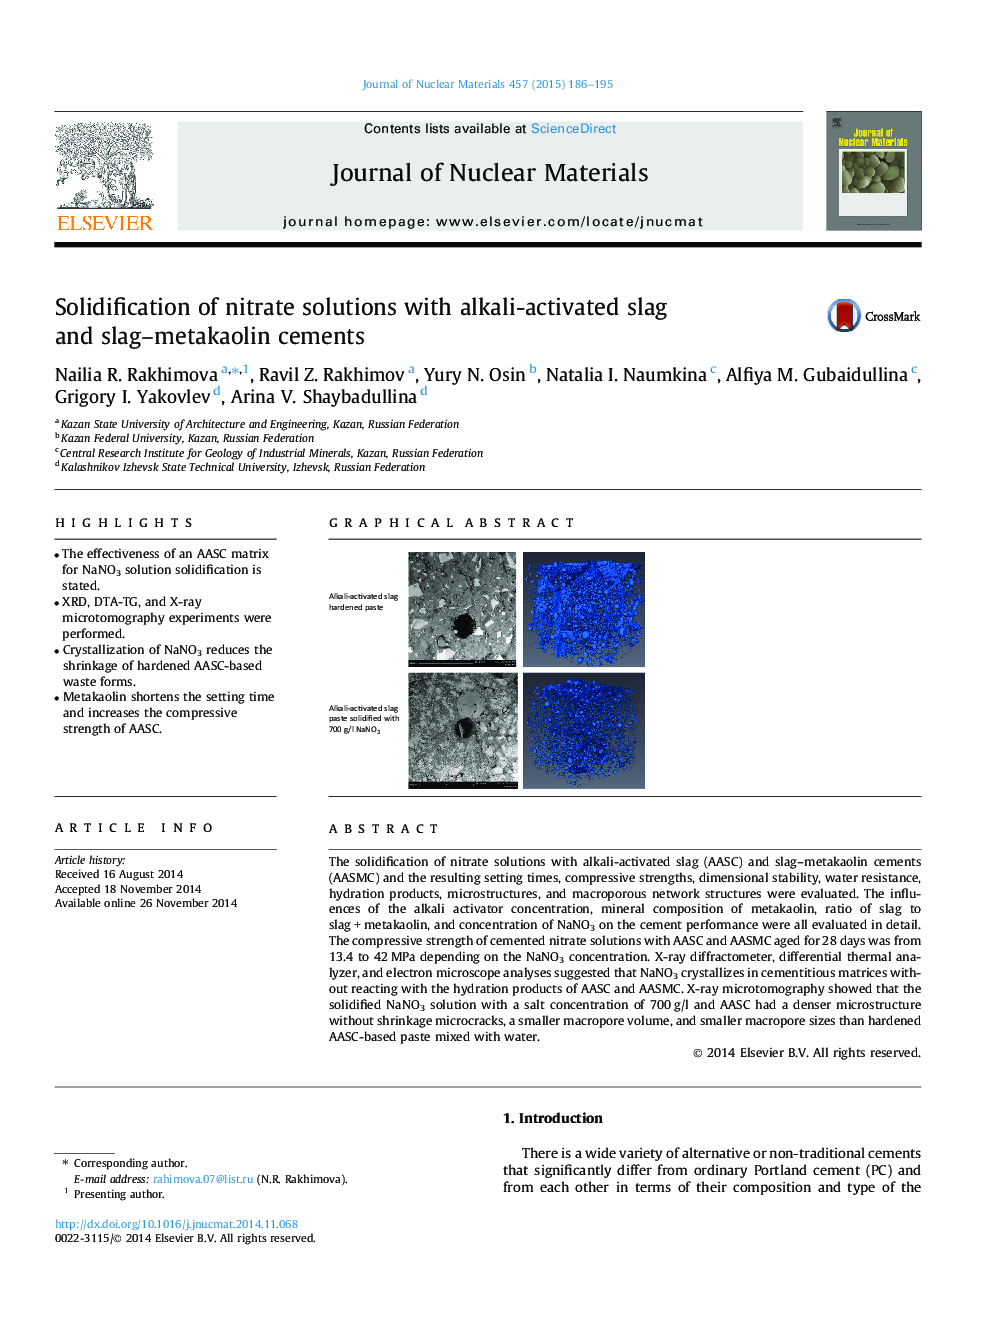 Solidification of nitrate solutions with alkali-activated slag and slag-metakaolin cements